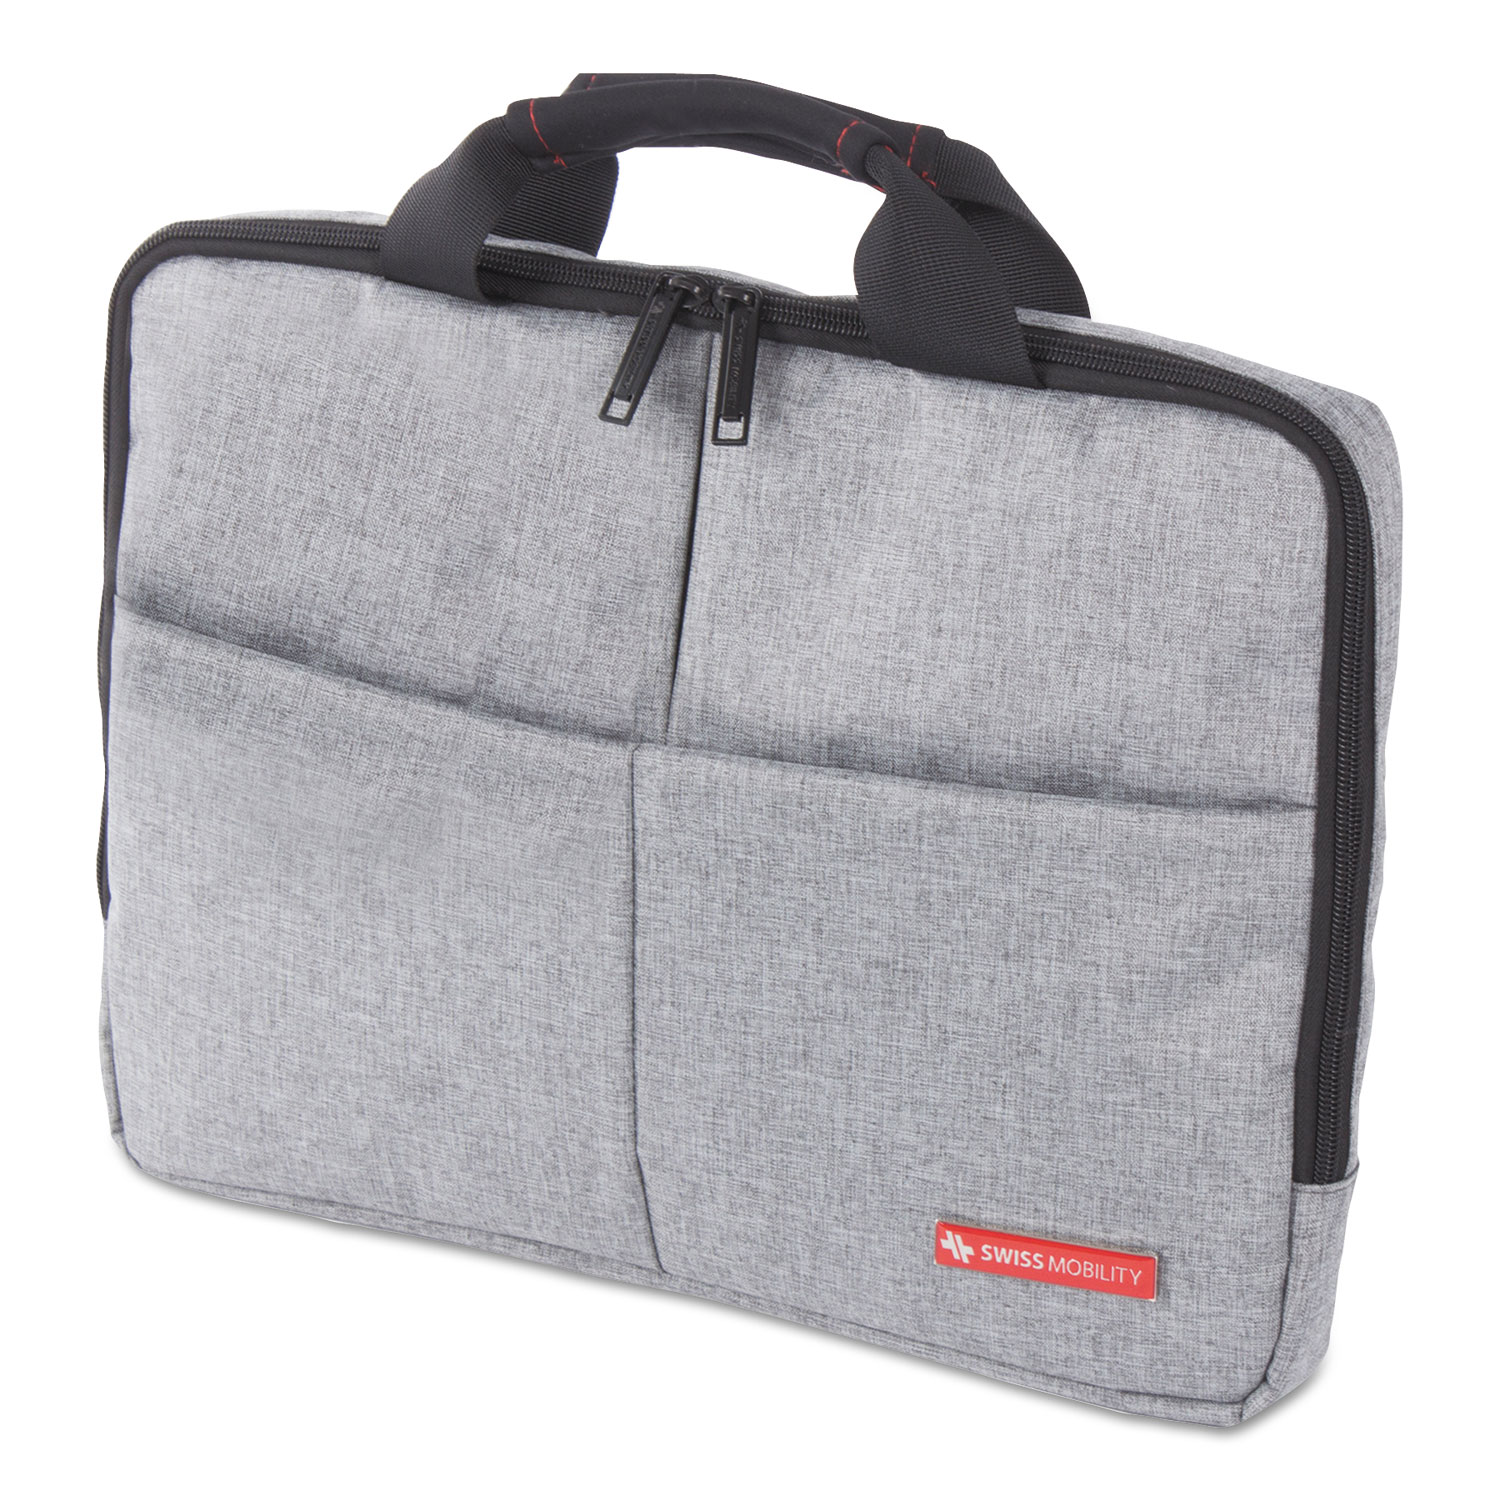 Sterling Slim Briefcase, Holds Laptops 14.1", 1.75" x 1.75" x 10.25", Gray